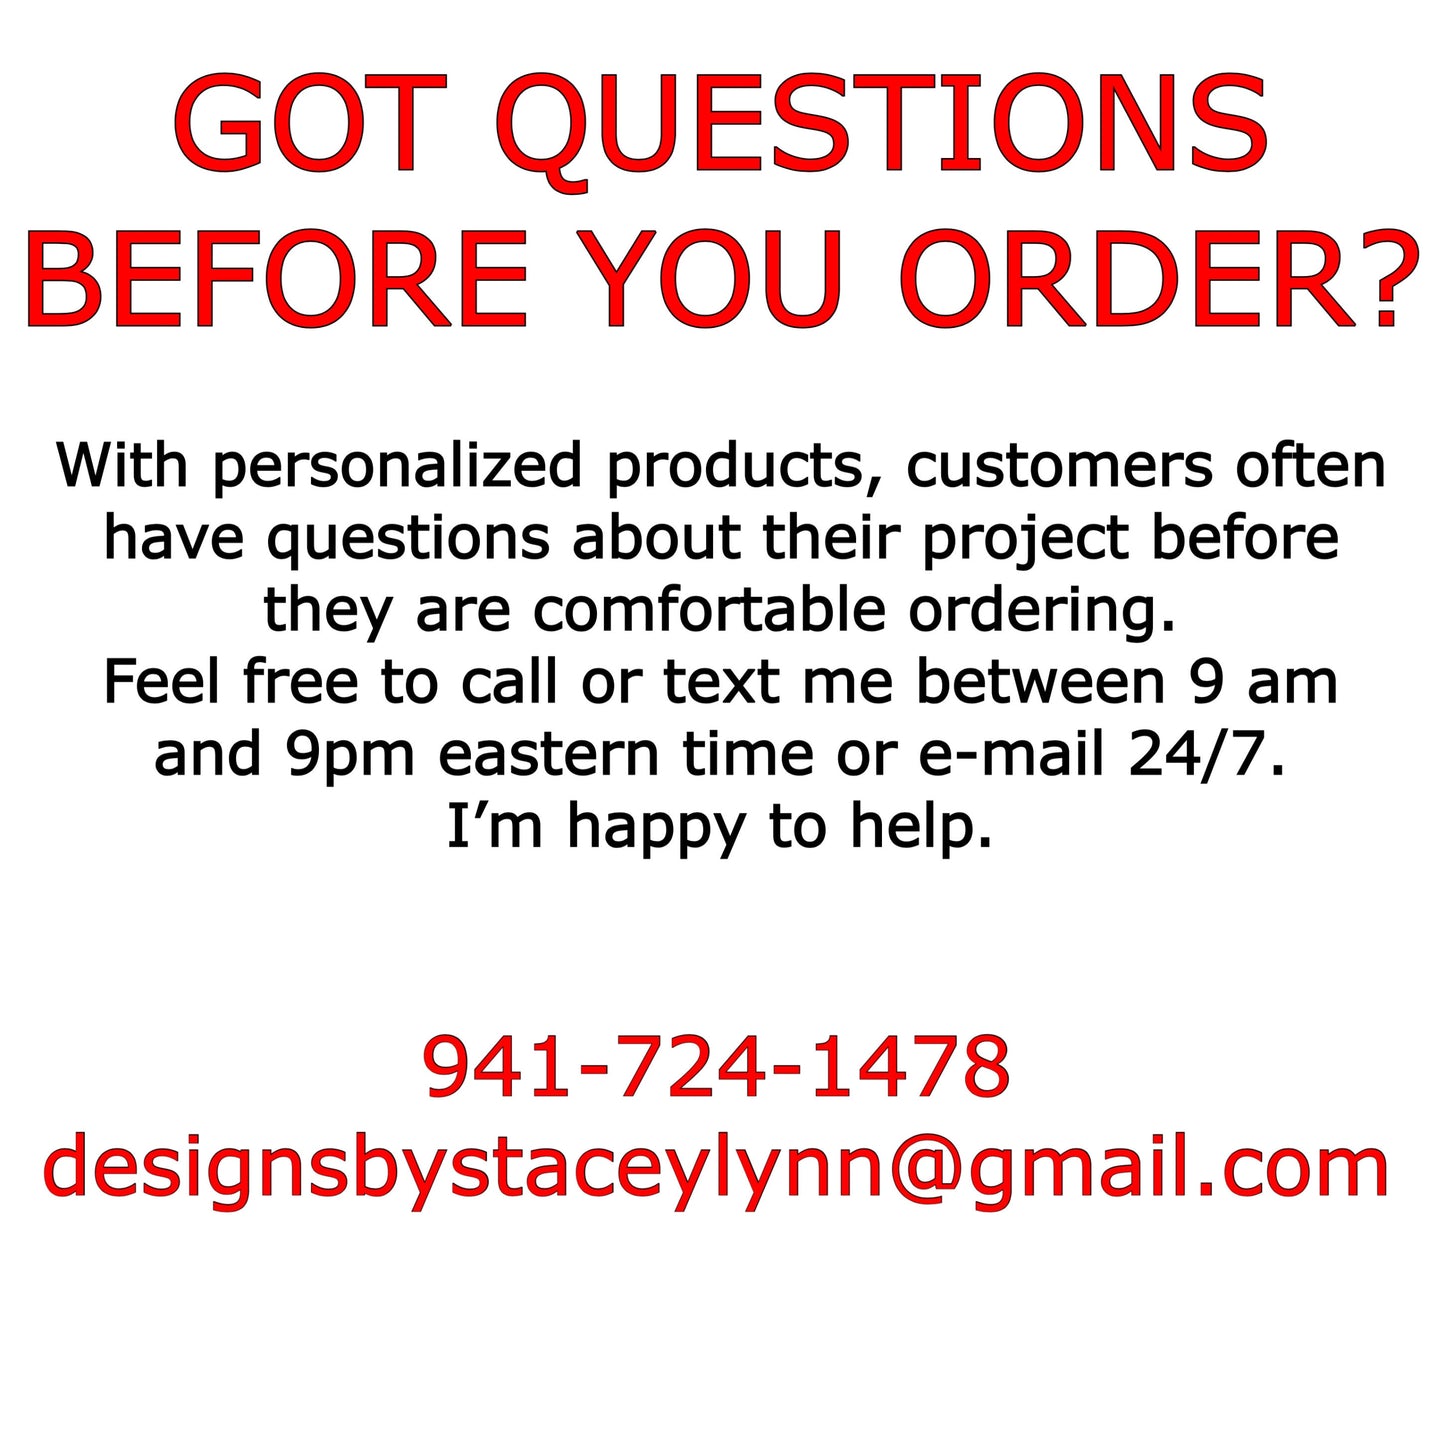 Custom order deposit - for personal, non-commercial orders